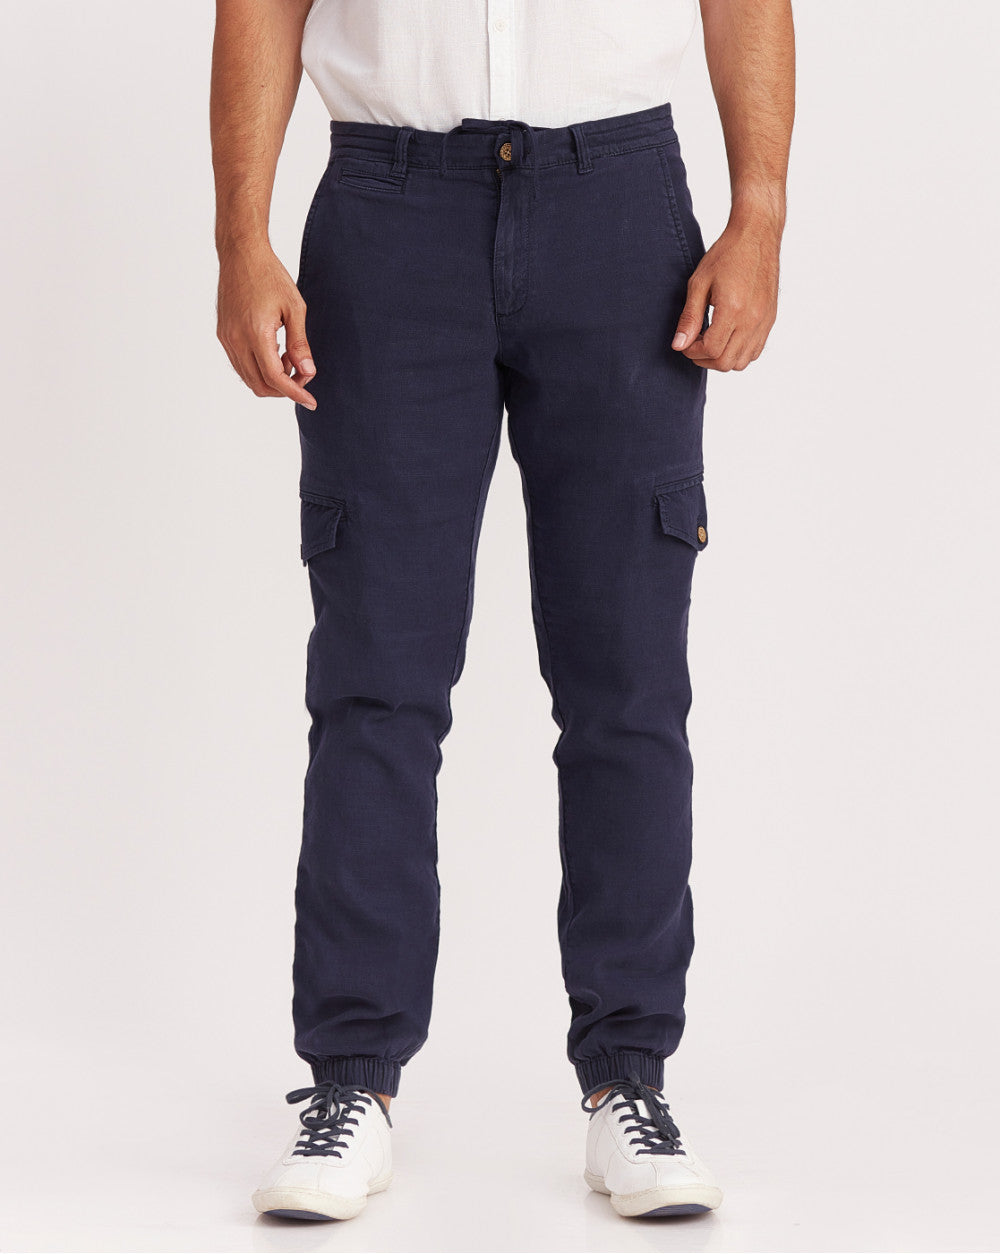 Tapered Fit Leisure Cargos - Navy